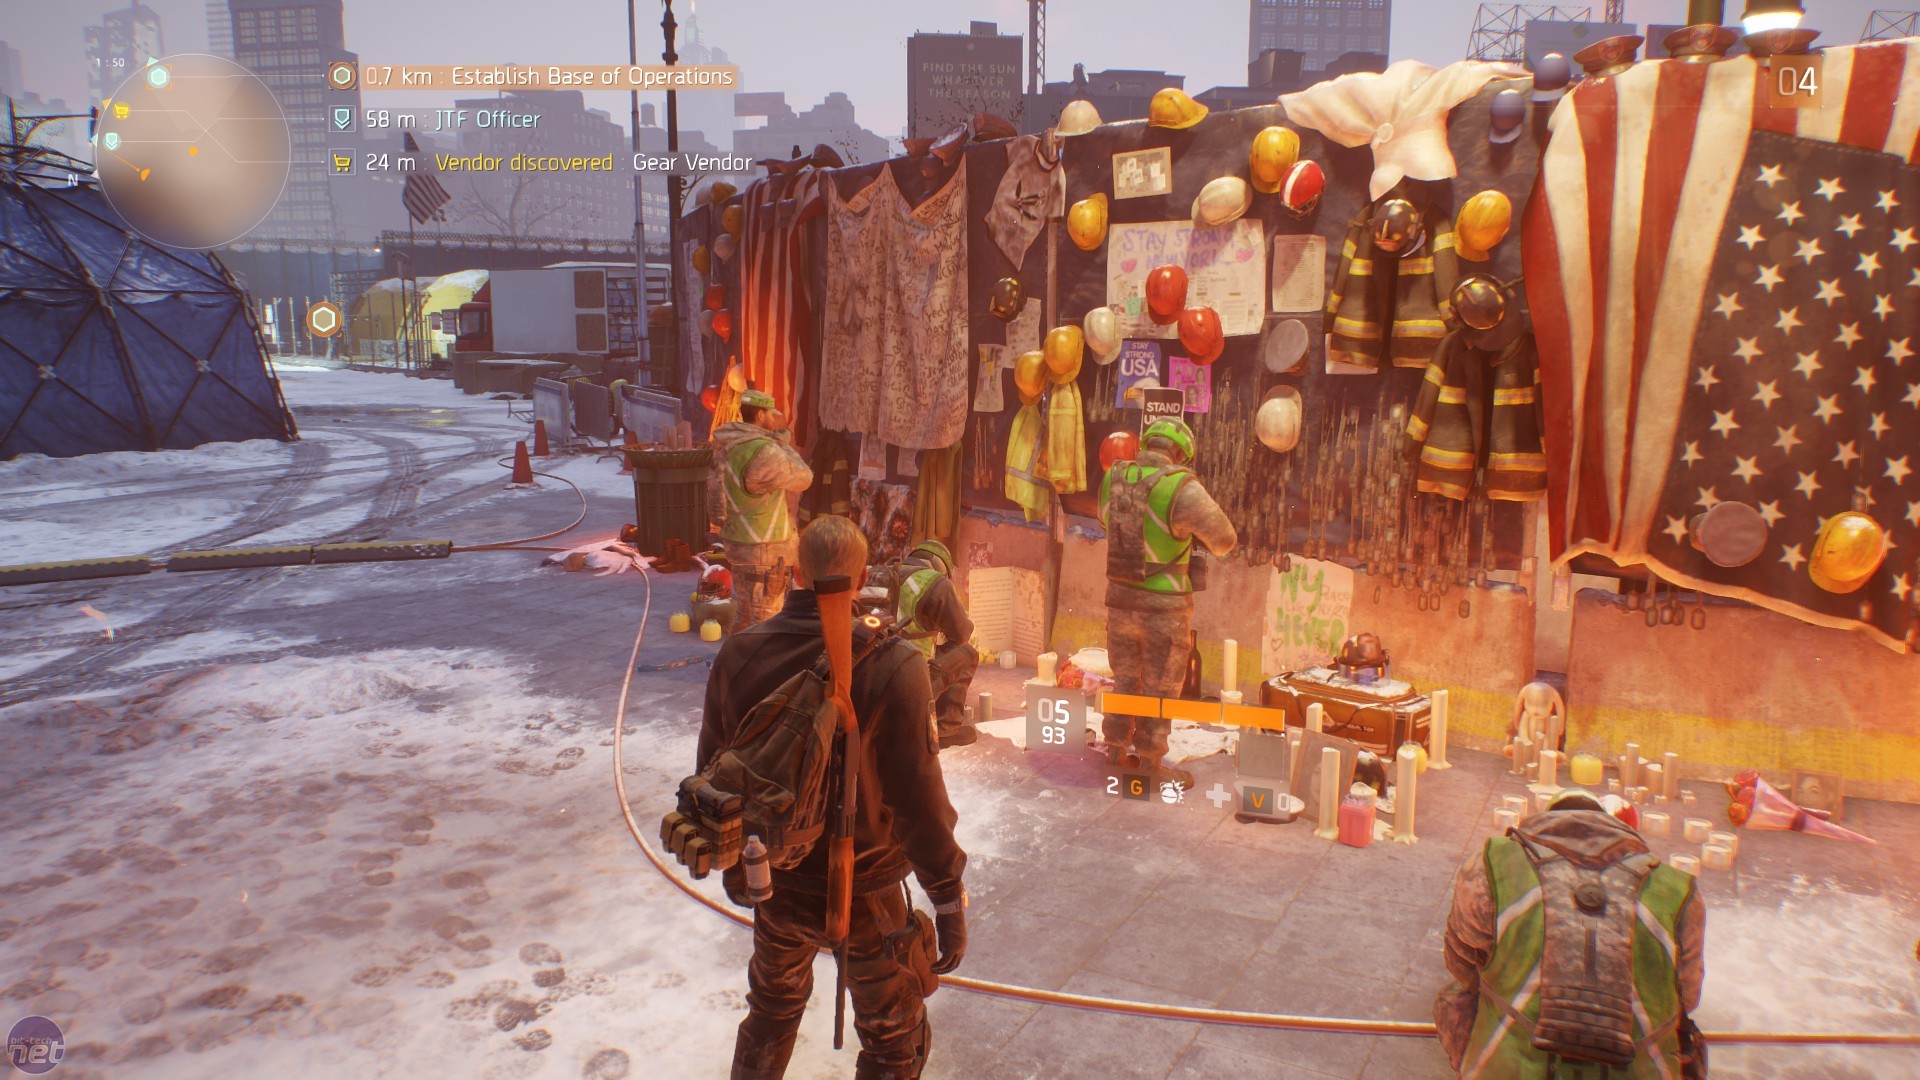 Tom Clancy's The Division PC game analysis